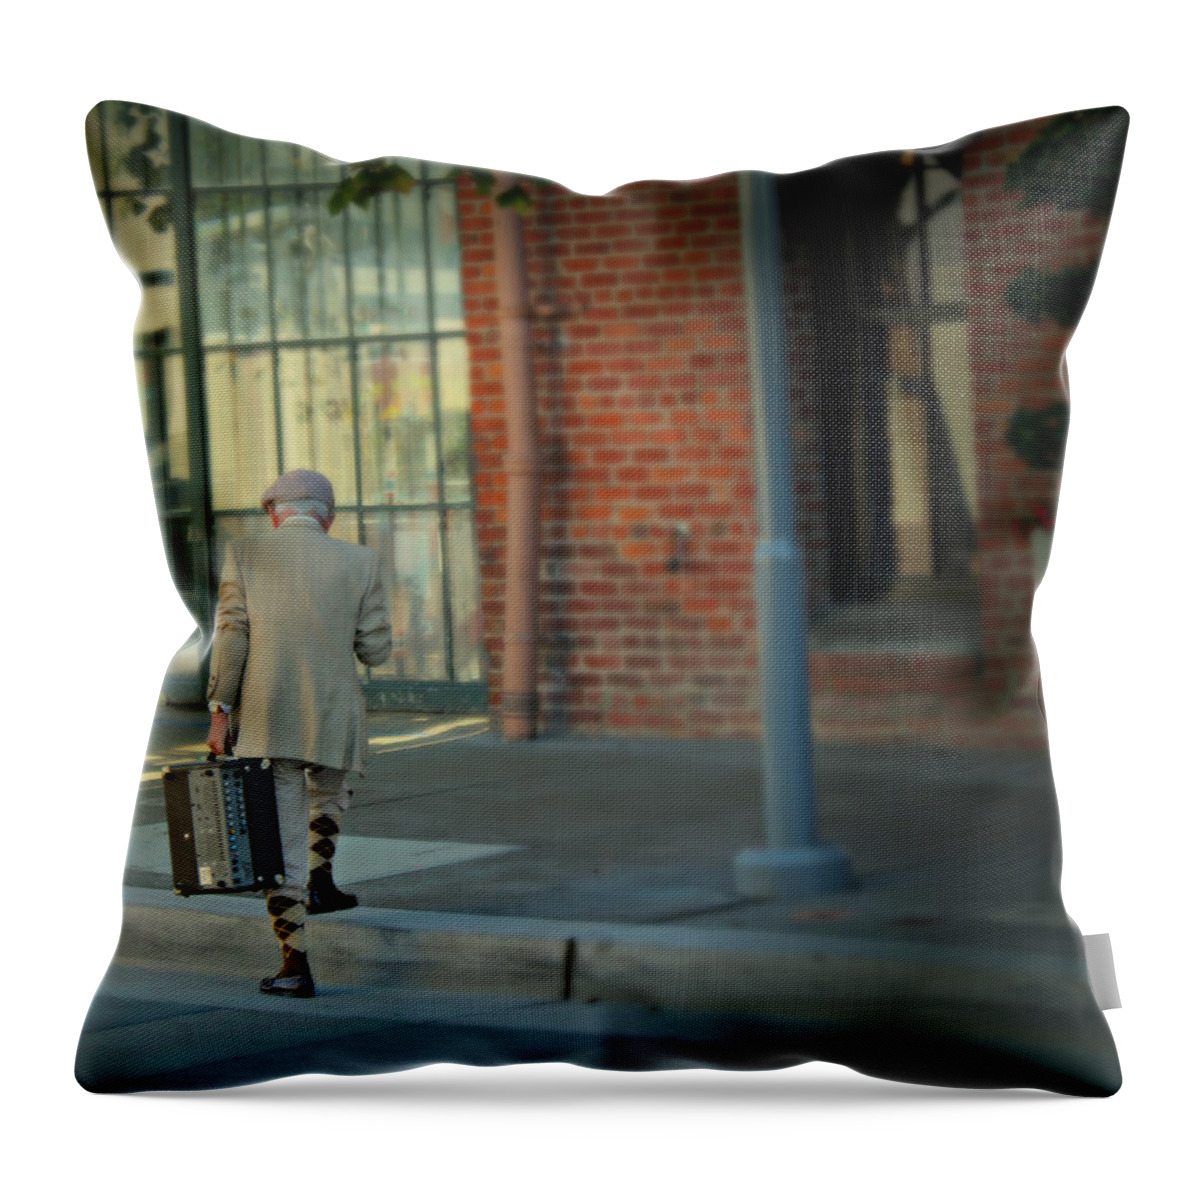  Accordion Throw Pillow featuring the photograph Accordion Man by Steve Natale